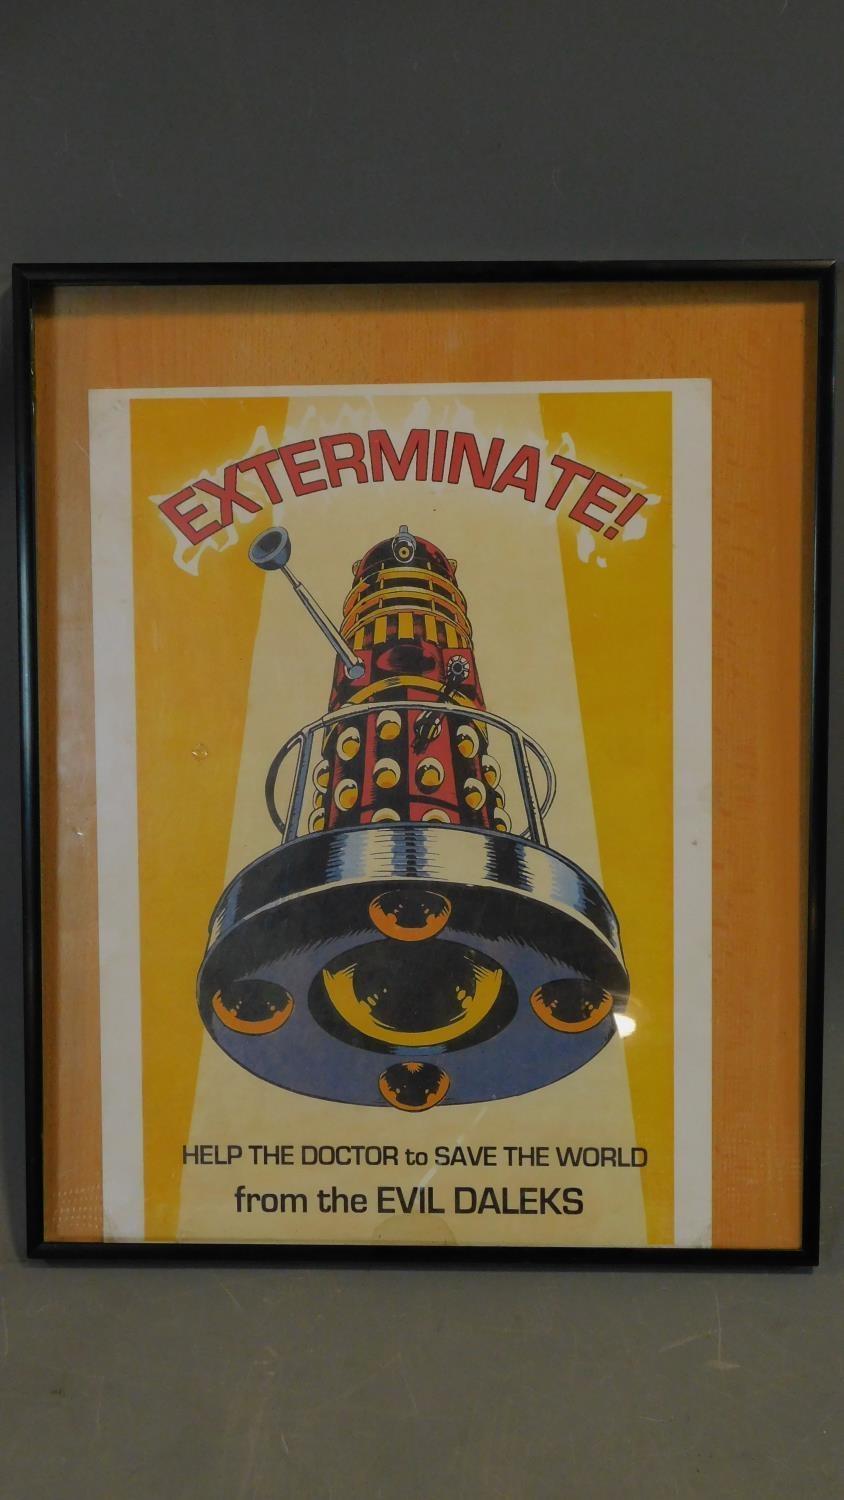 An original Doctor Who poster issuing a clear warning to all about the evil of the daleks. 51x41cm